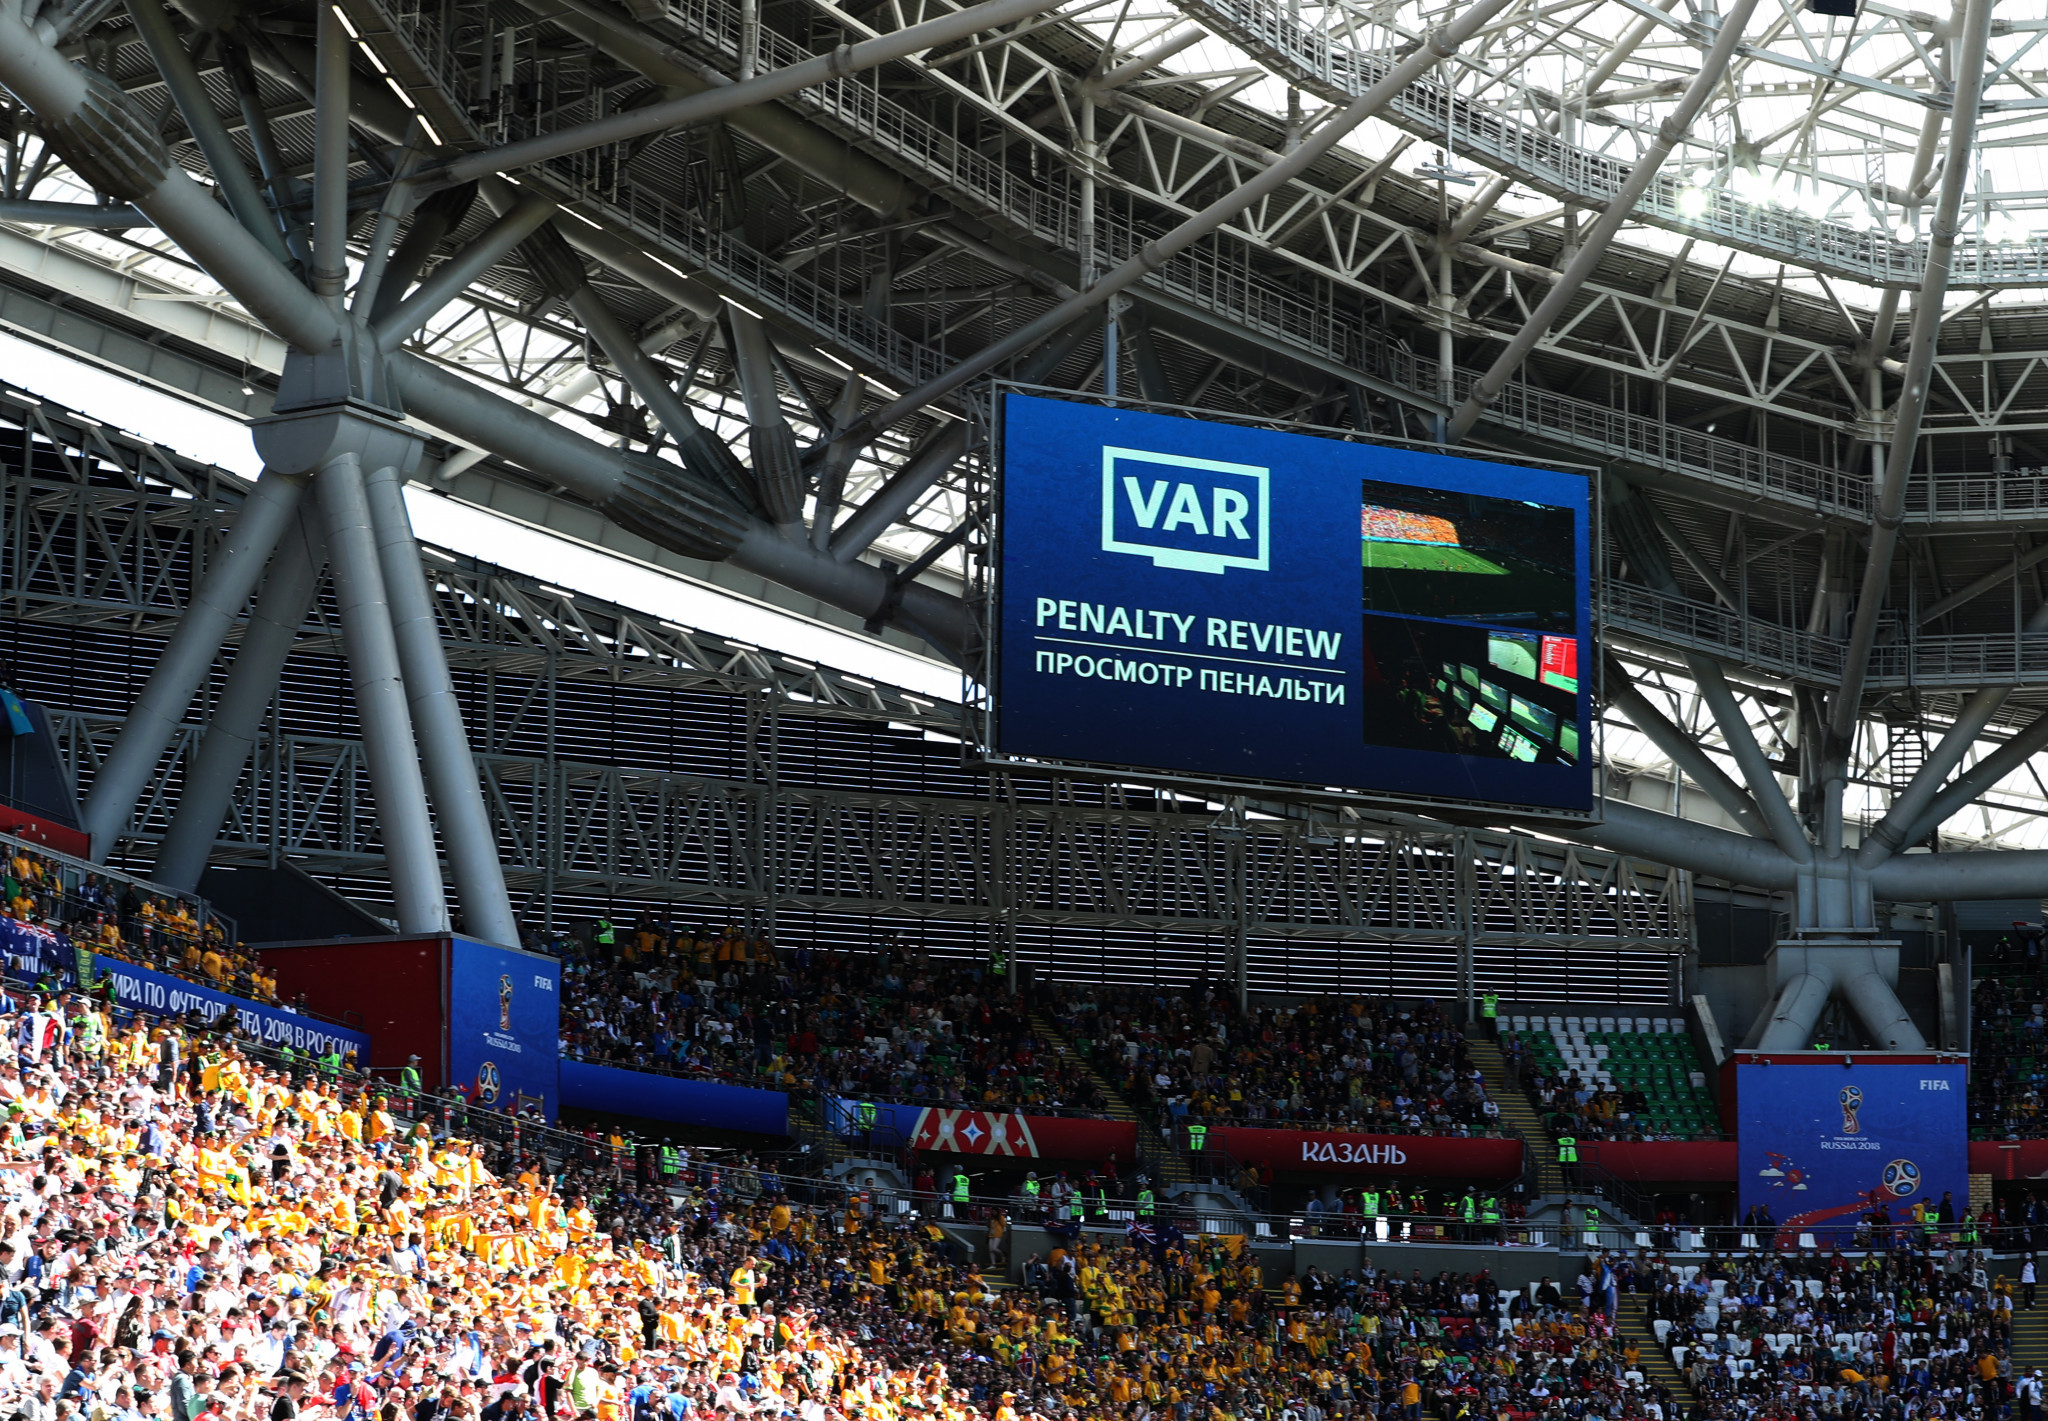 World Cup history was made by the use of VAR technology ©Getty Images